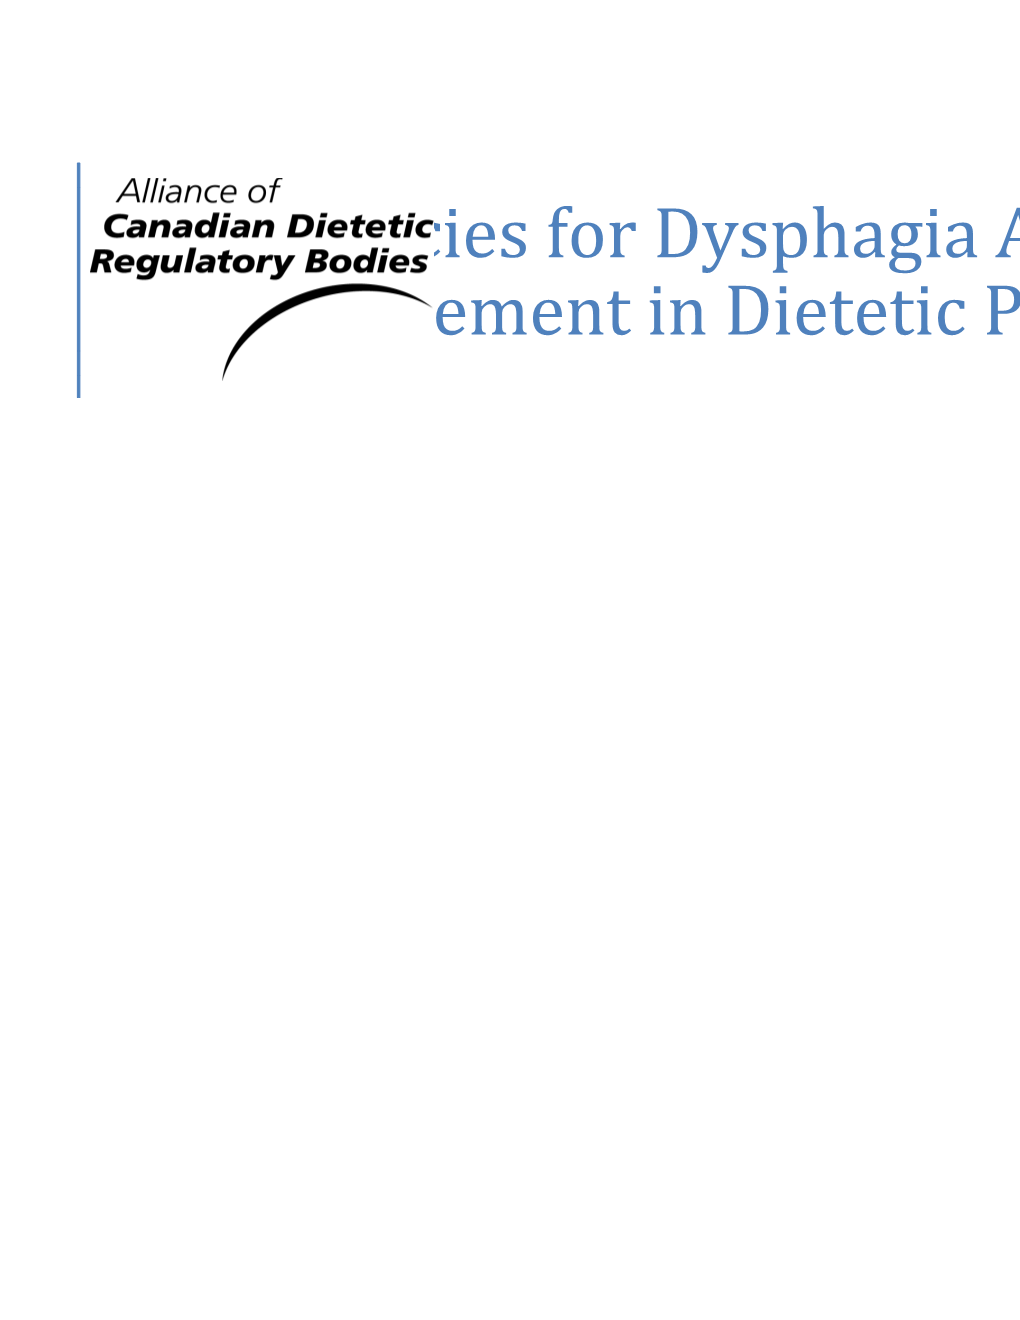 Competencies for Dysphagia Assessment and Management in Dietetic Practice